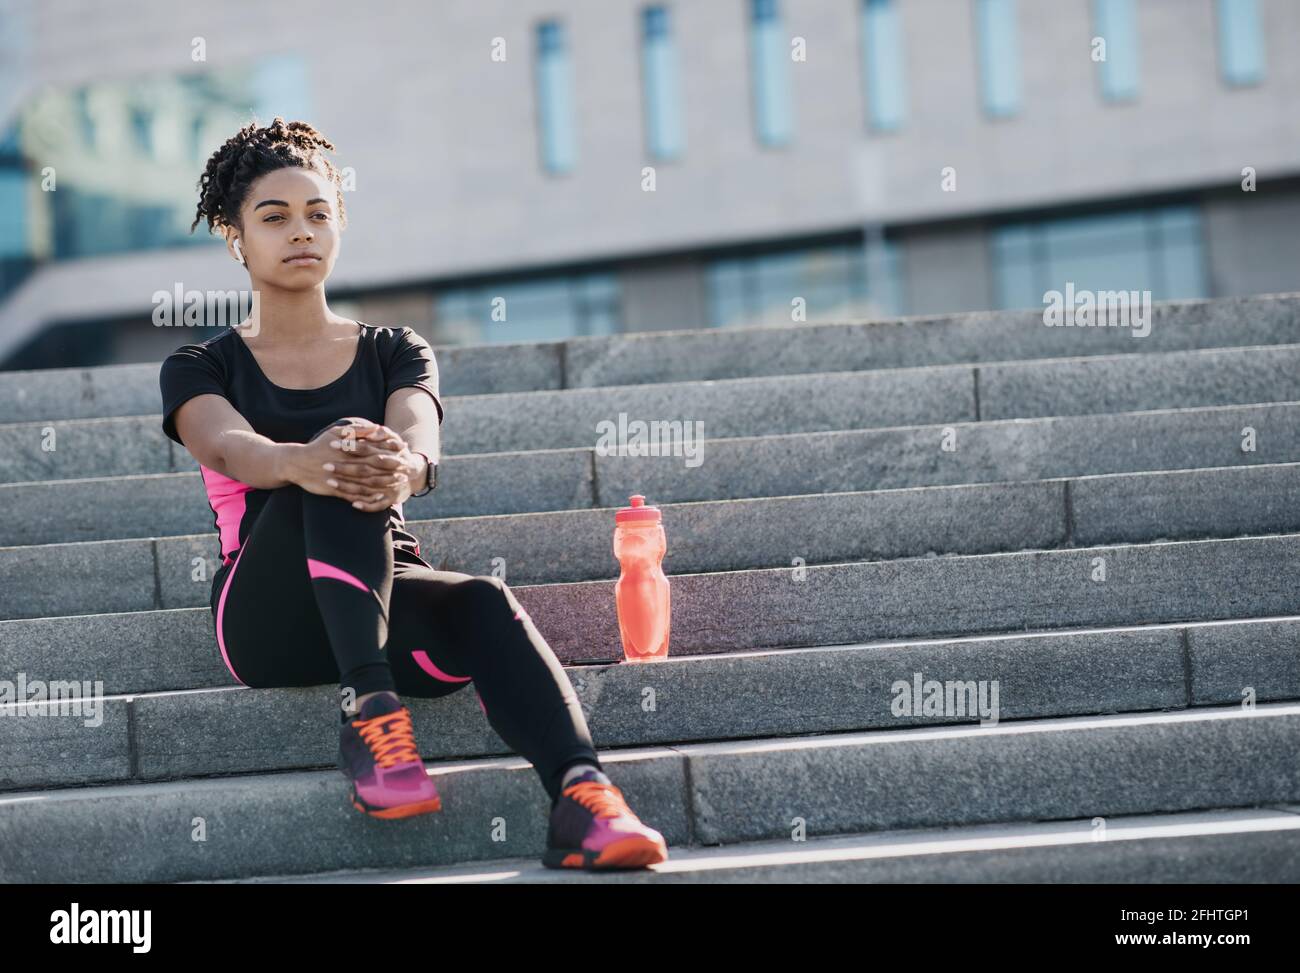 Urban workout, health care and relaxation after running, modern training with gadgets Stock Photo